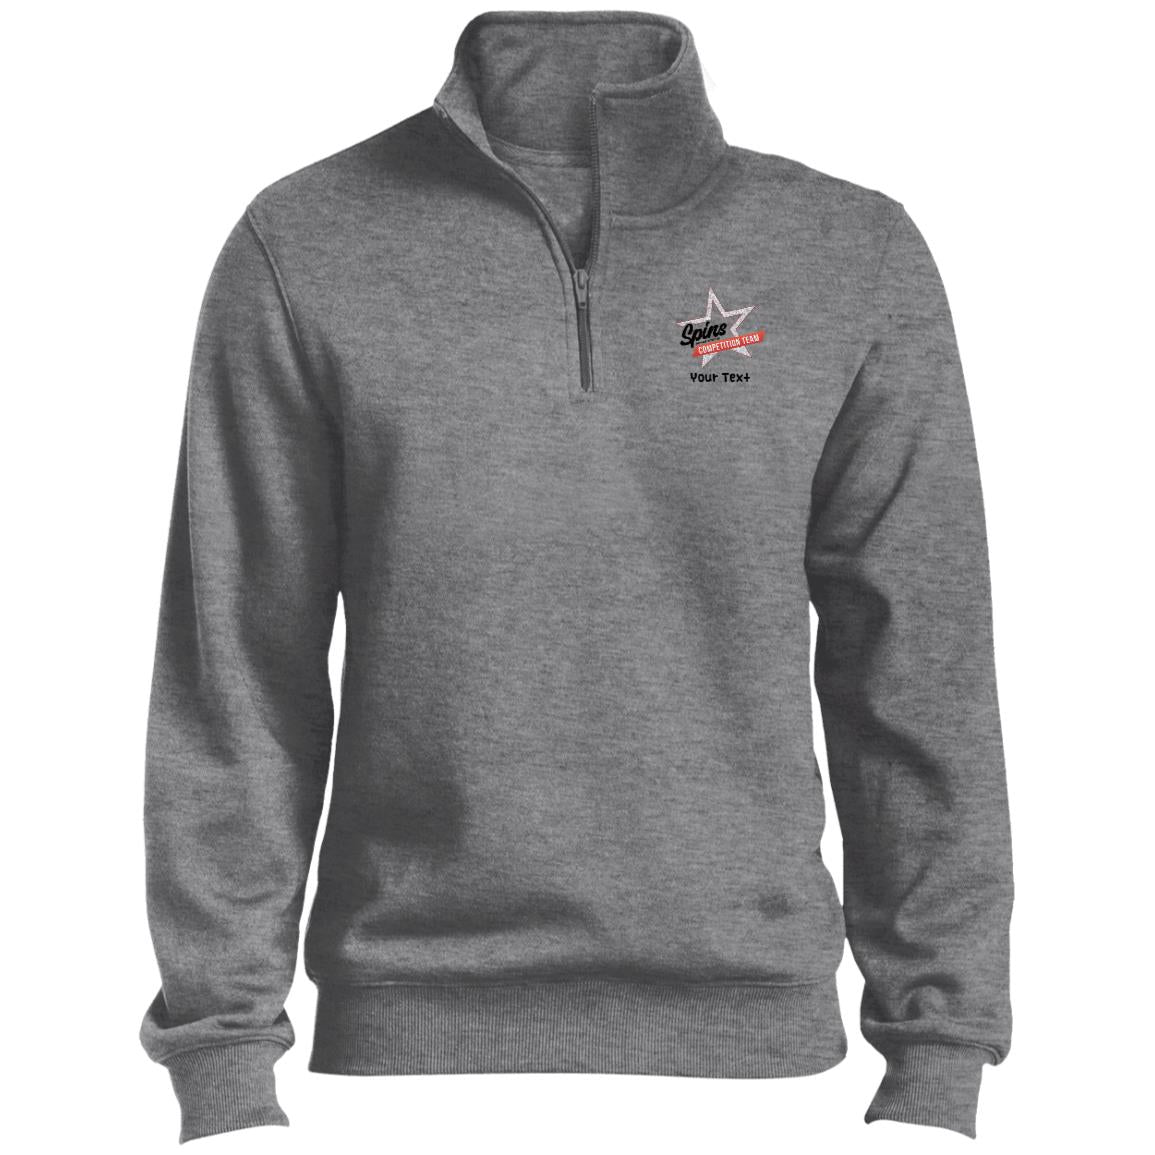 Spins Competition Team 1/4 Zip Sweatshirt - With Personalization